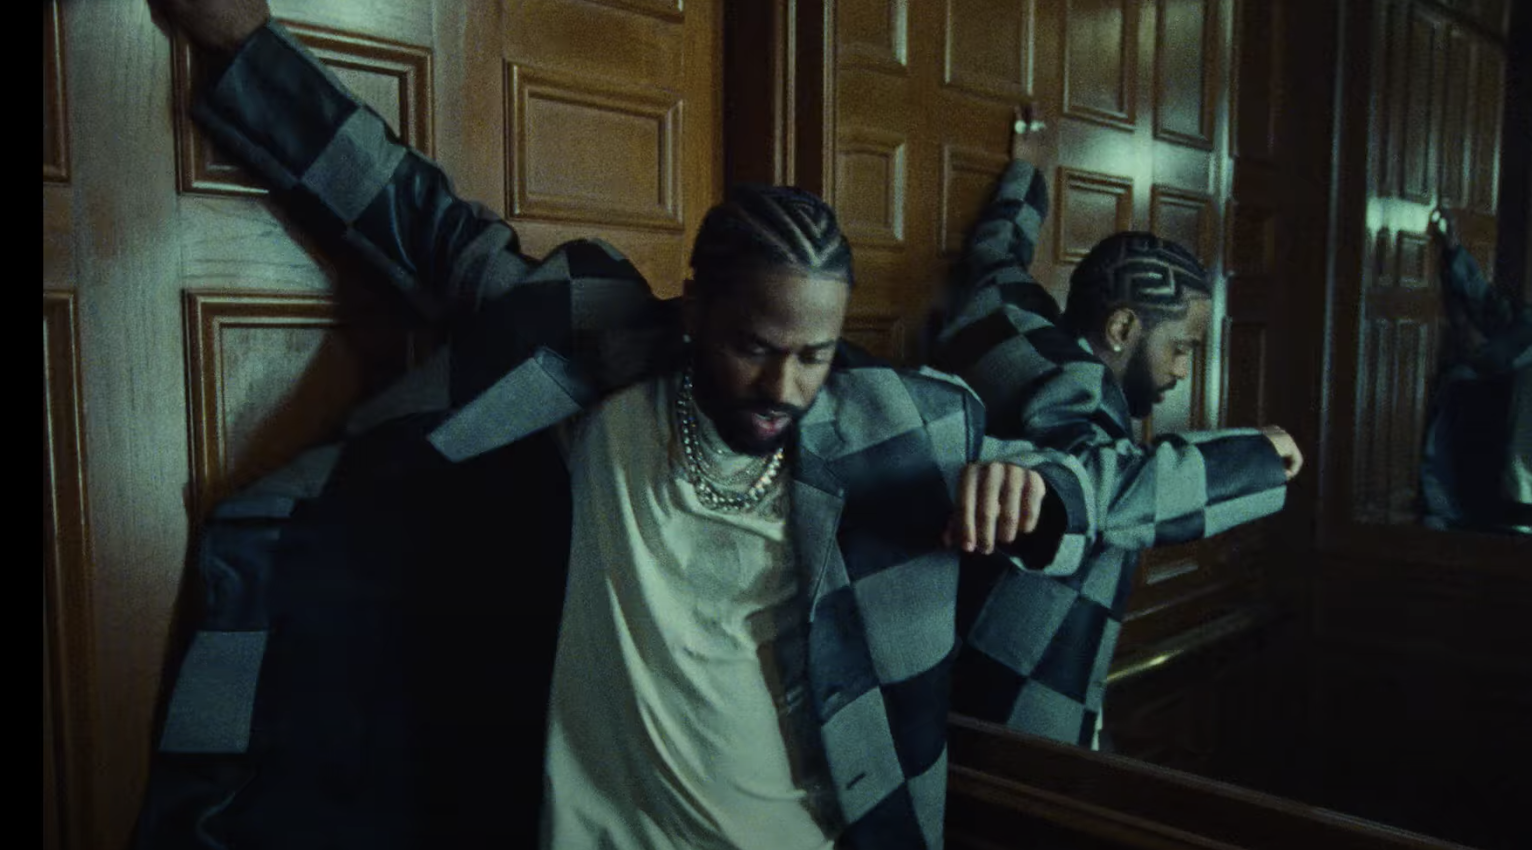 SPOTTED: Big Sean in Lithuania Music Video Featuring Travis Scott